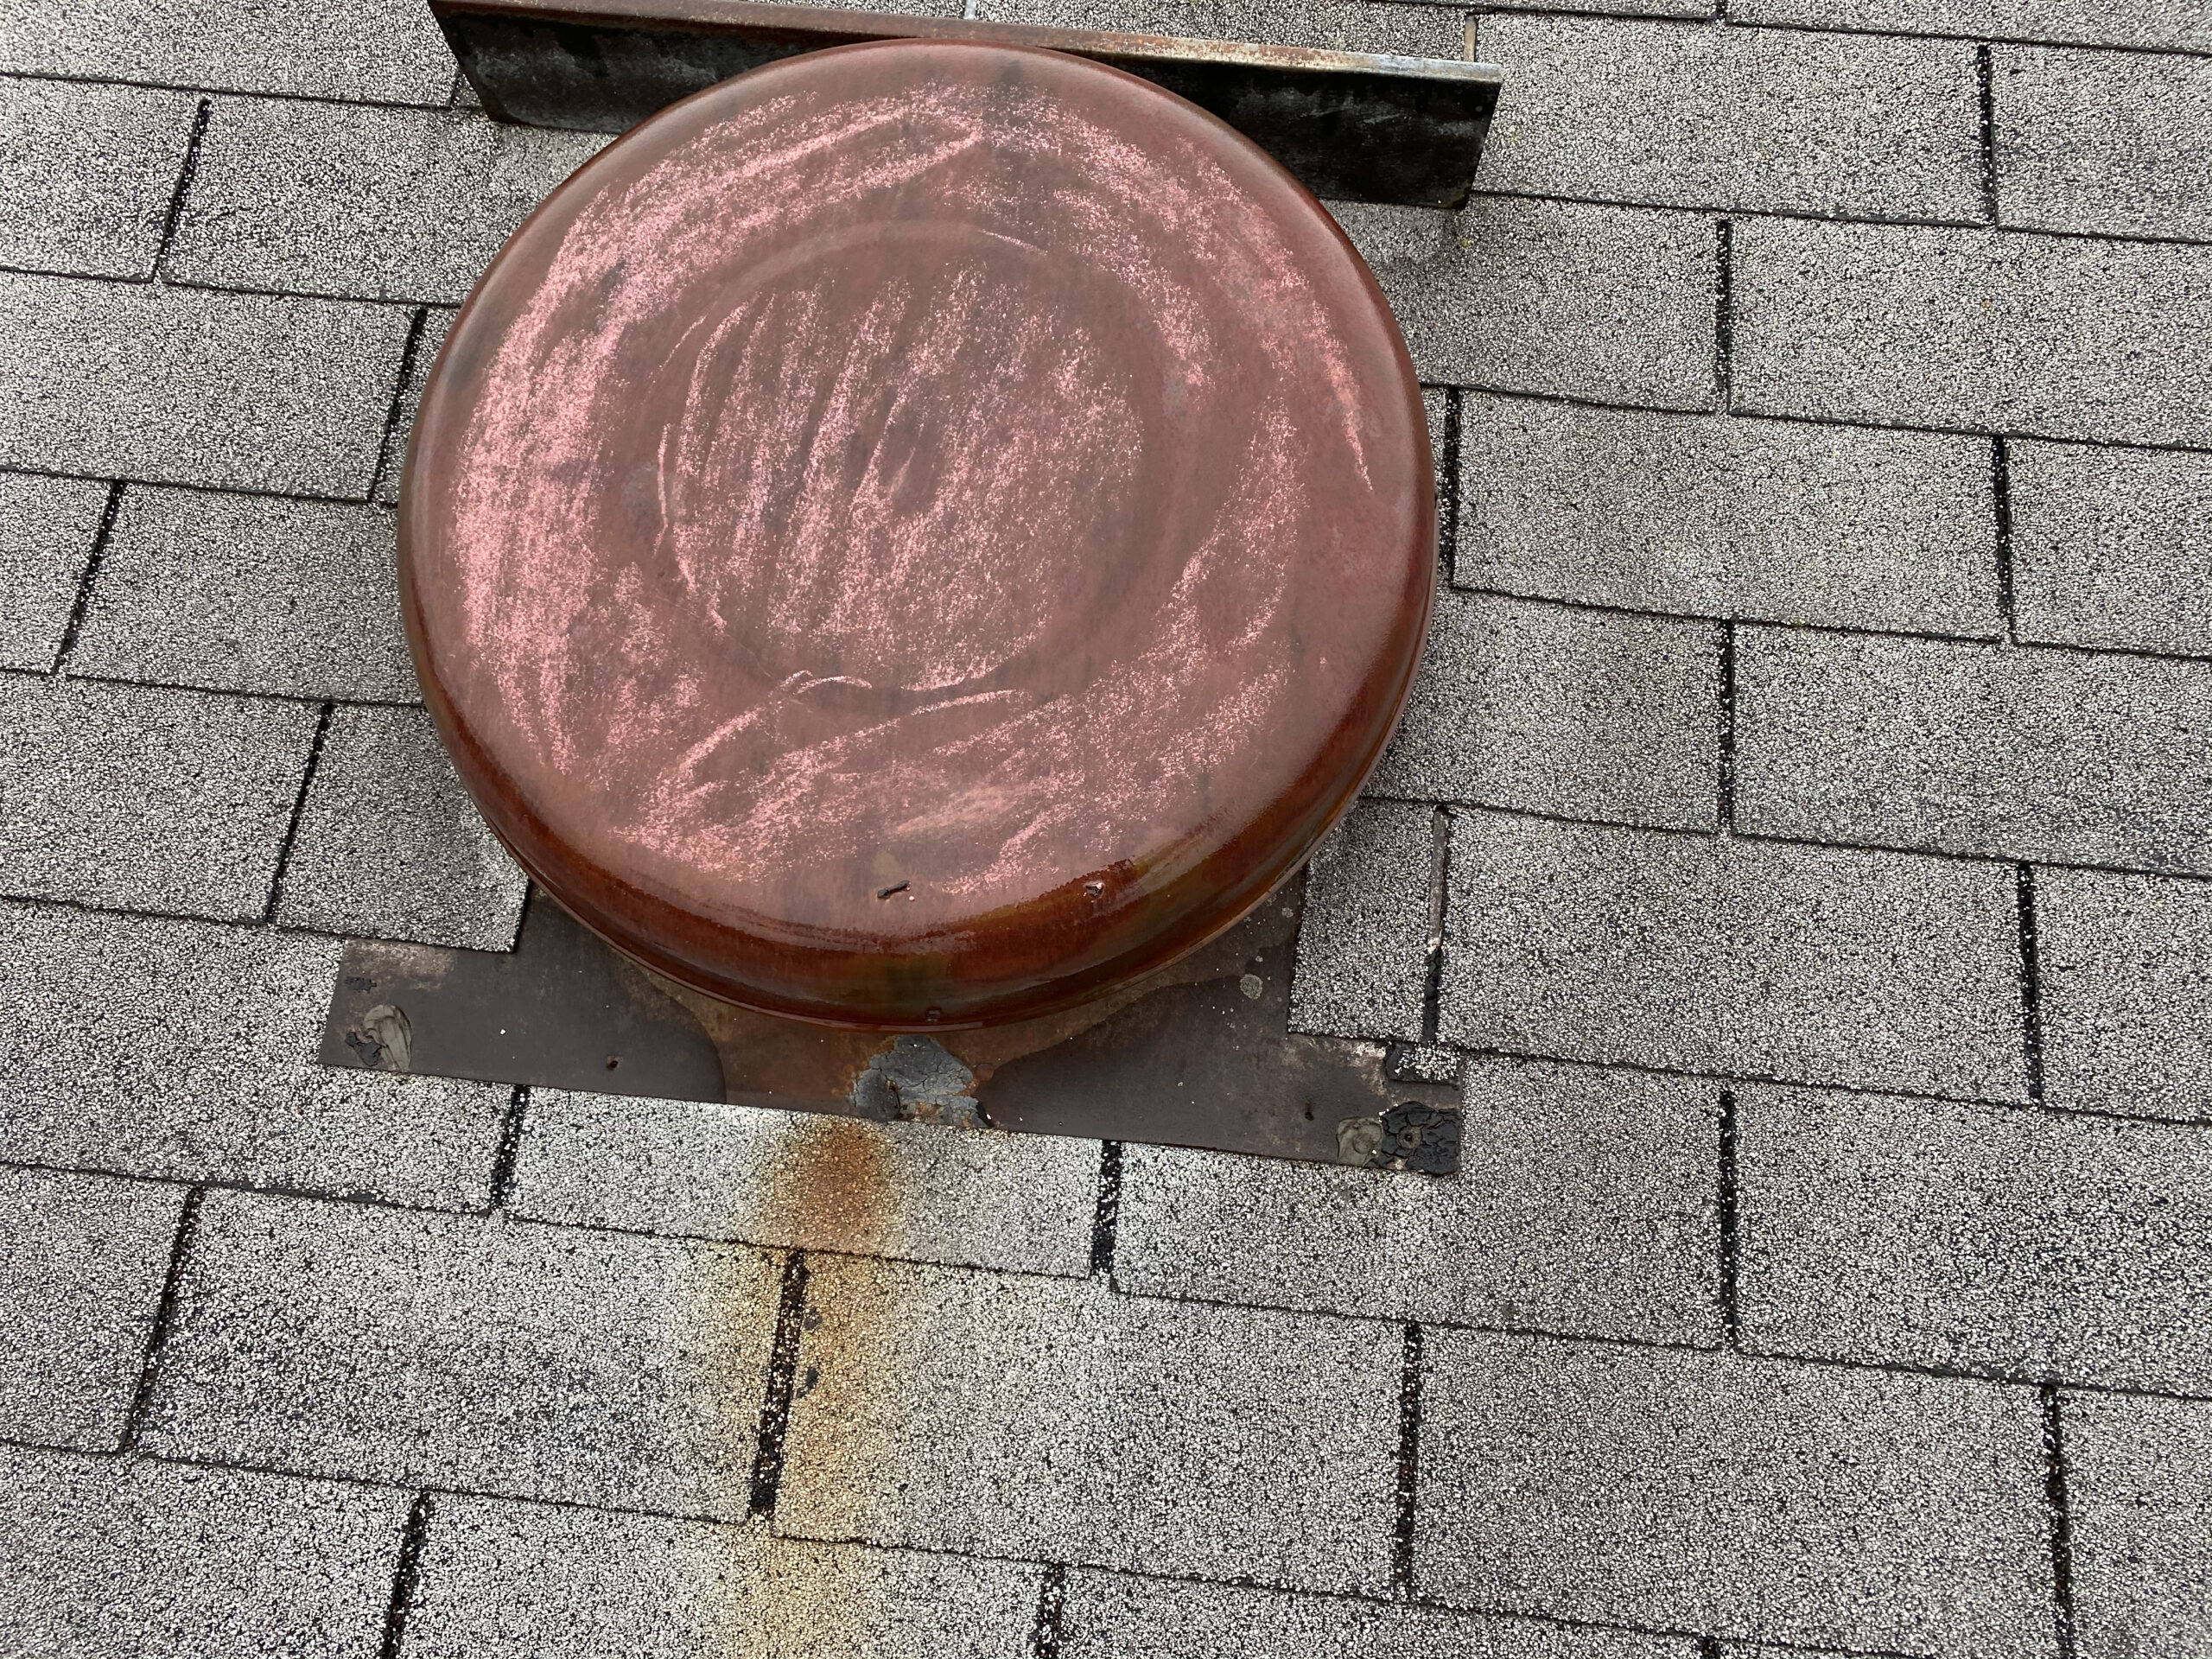 This is a picture of an old red roof vent